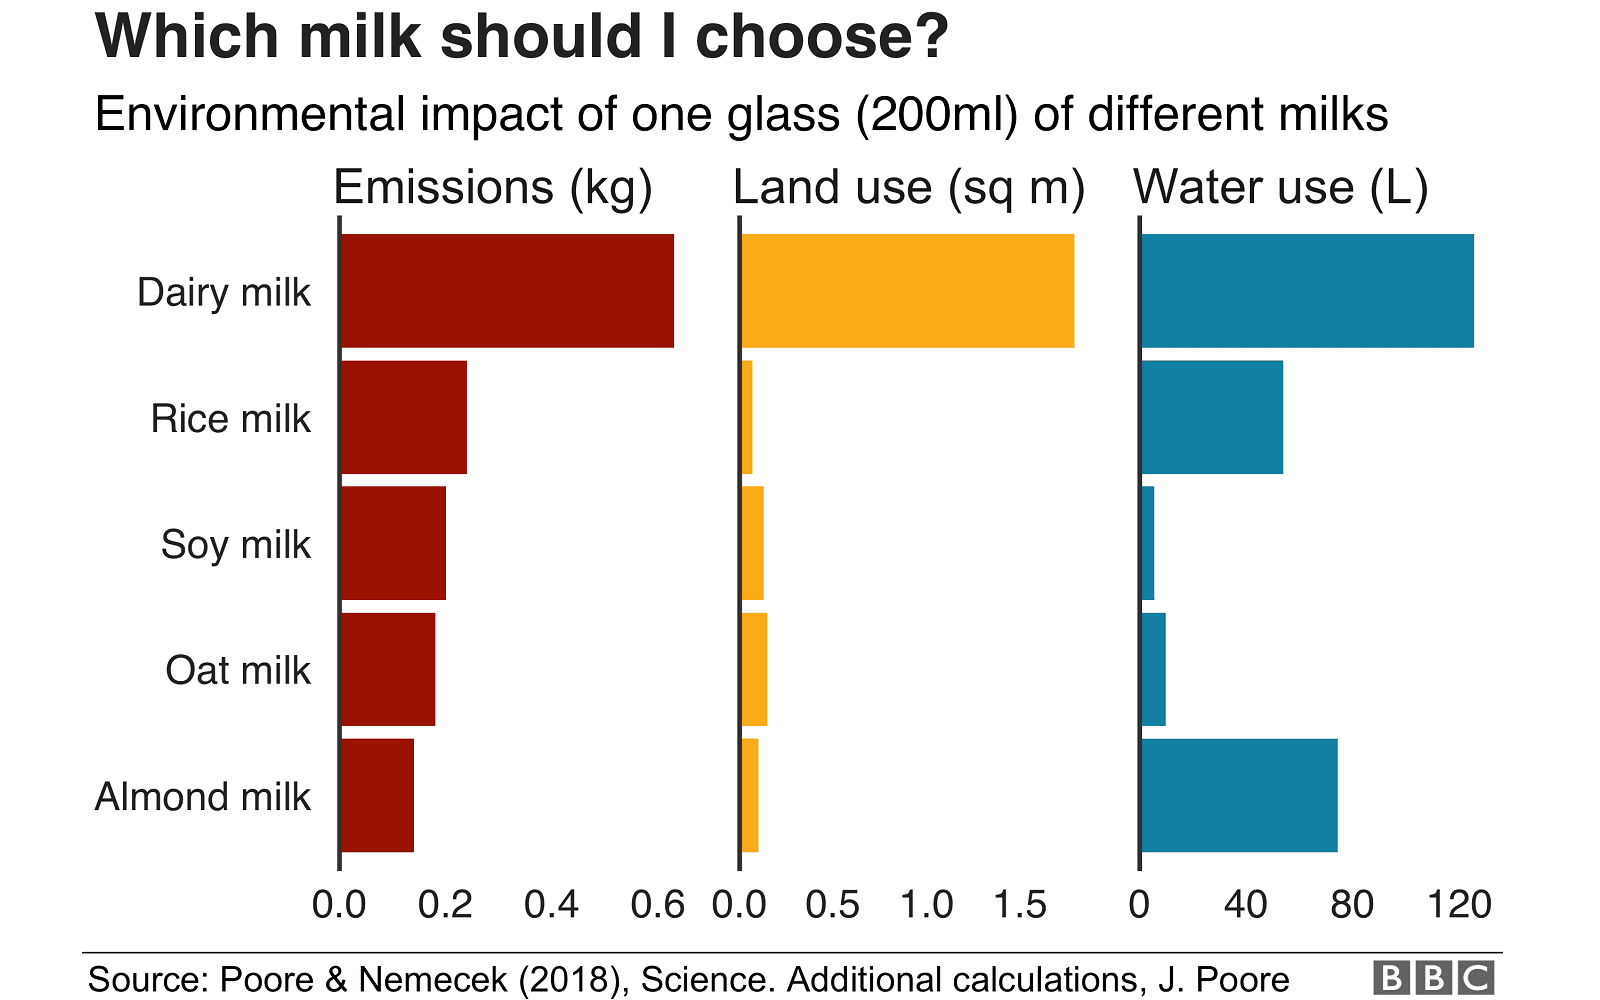 Comparing the environmental impact of different milks